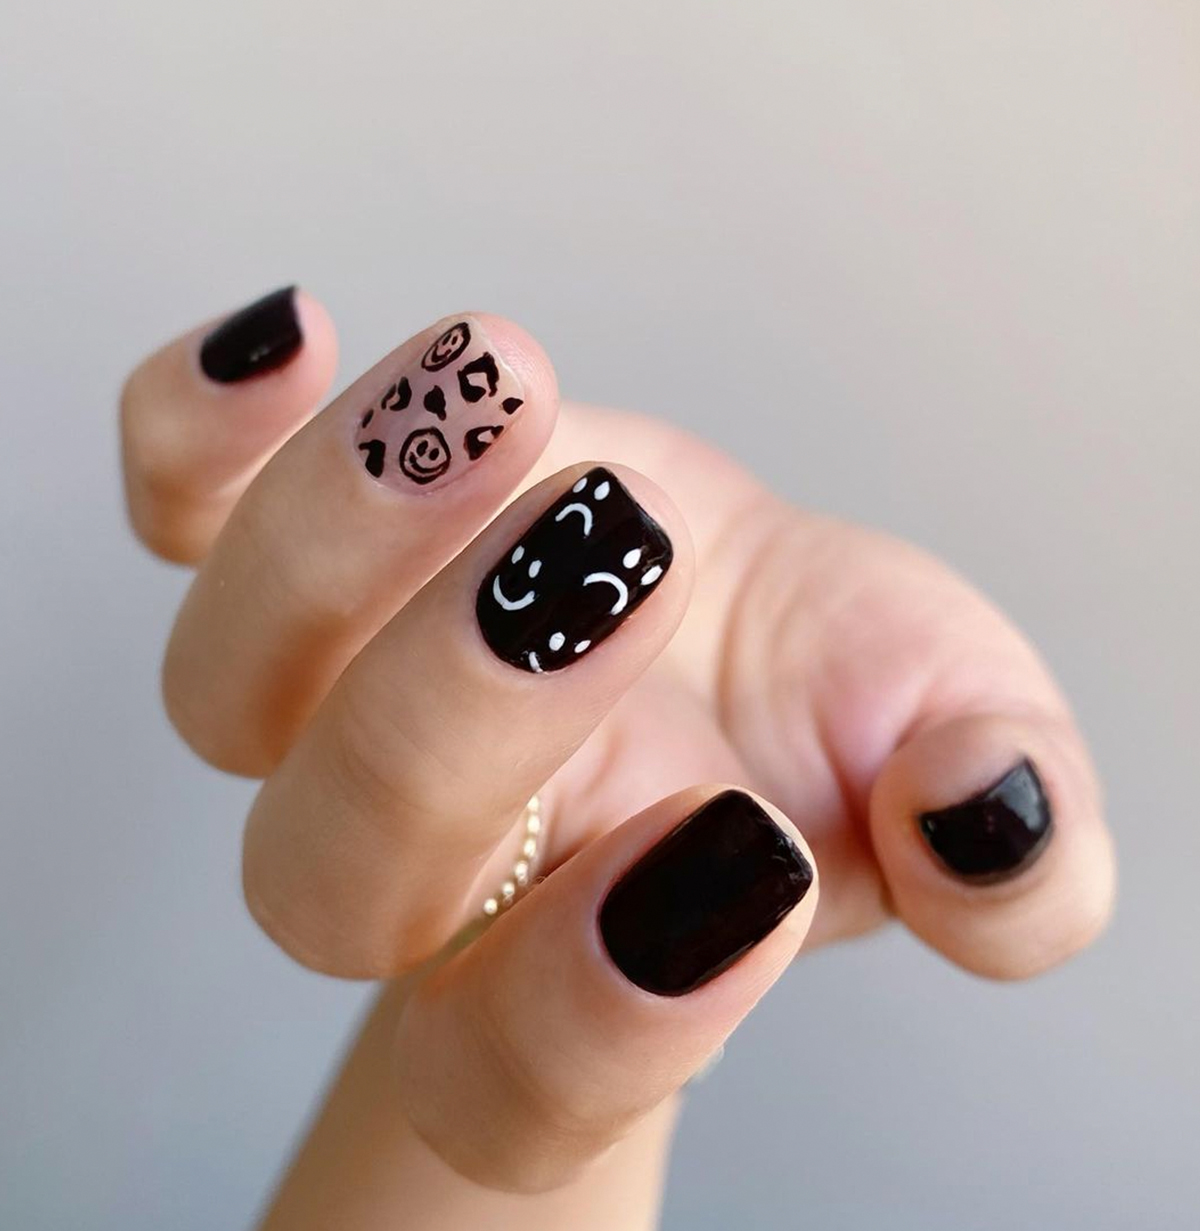 The 15 Best Black Nail Designs That Are Simple and Chic | Who What Wear